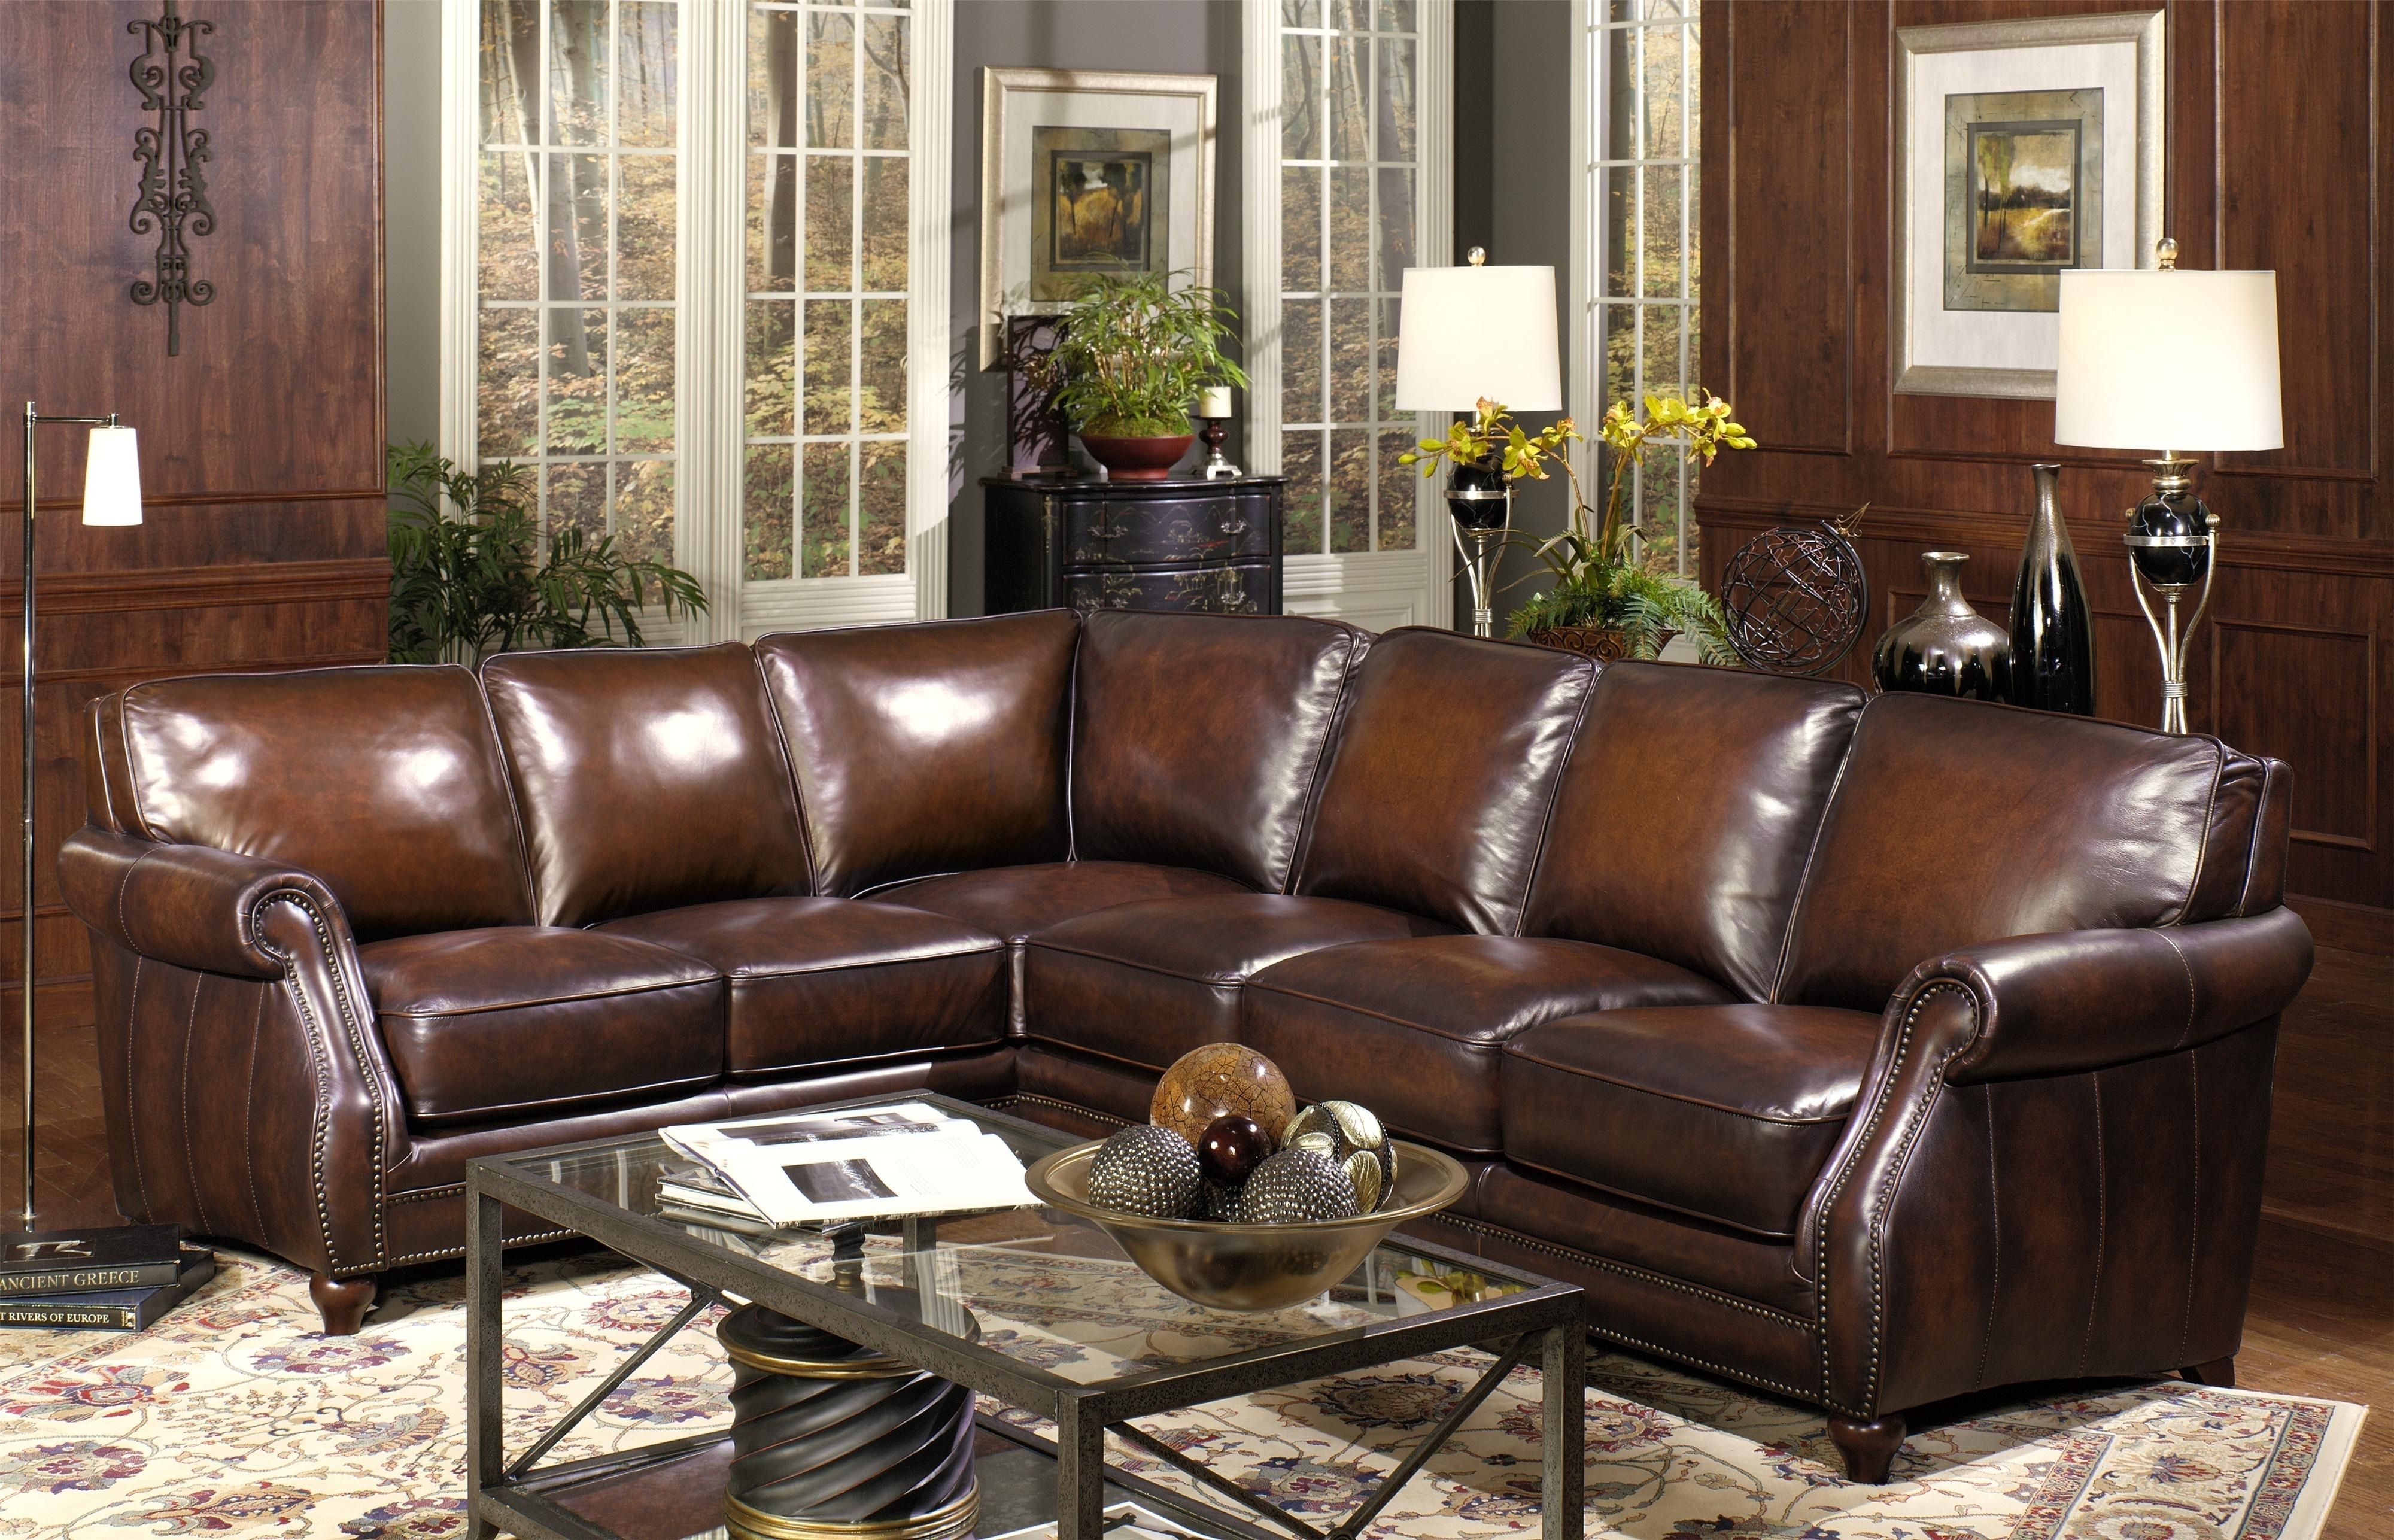 Elegant Leather Sectional Sofas San Diego 35 On Gray Modular In Within Sectional Sofas From Europe (Photo 7 of 10)